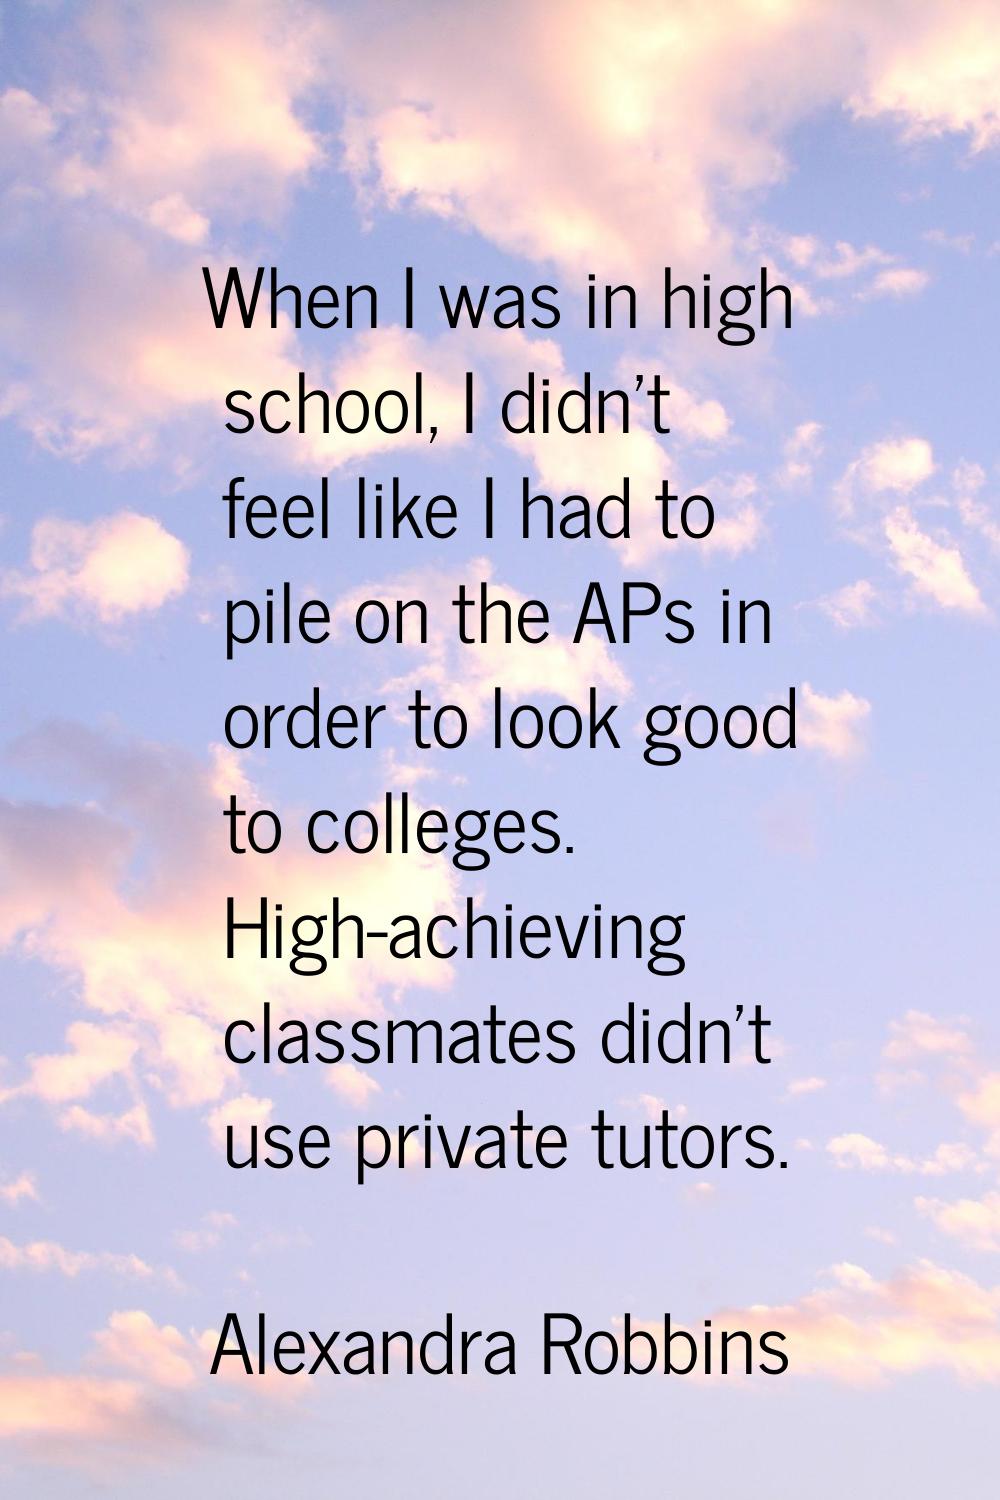 When I was in high school, I didn't feel like I had to pile on the APs in order to look good to col